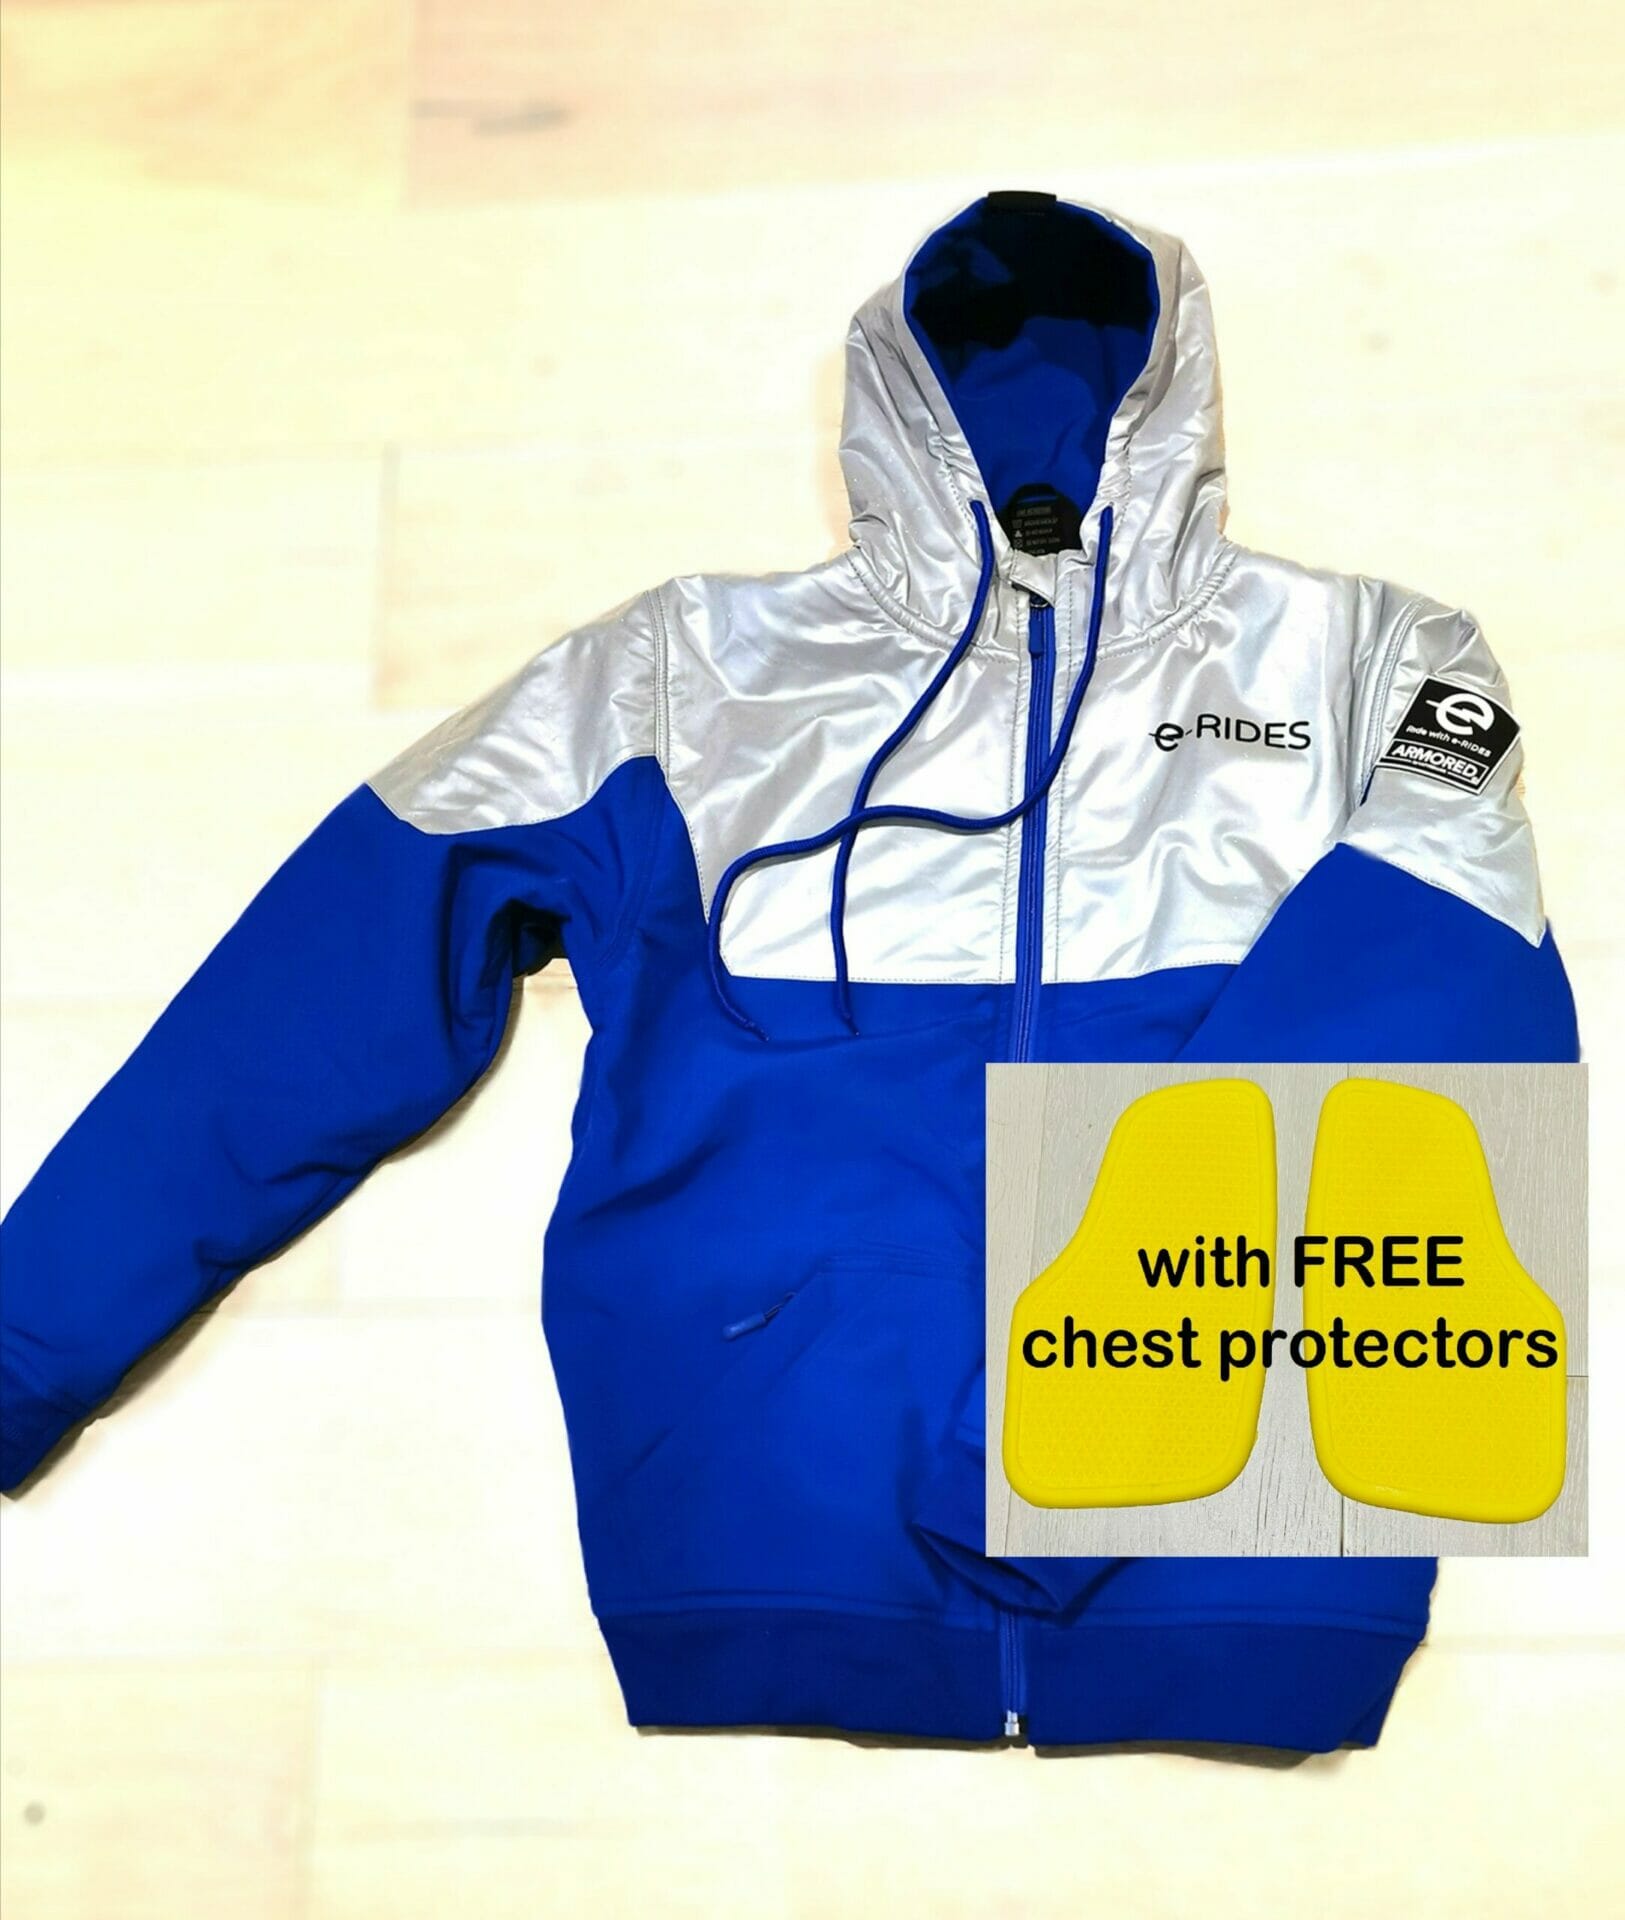 e-RIDES Edition Lazyrollilng jacket with chest protectors in blue